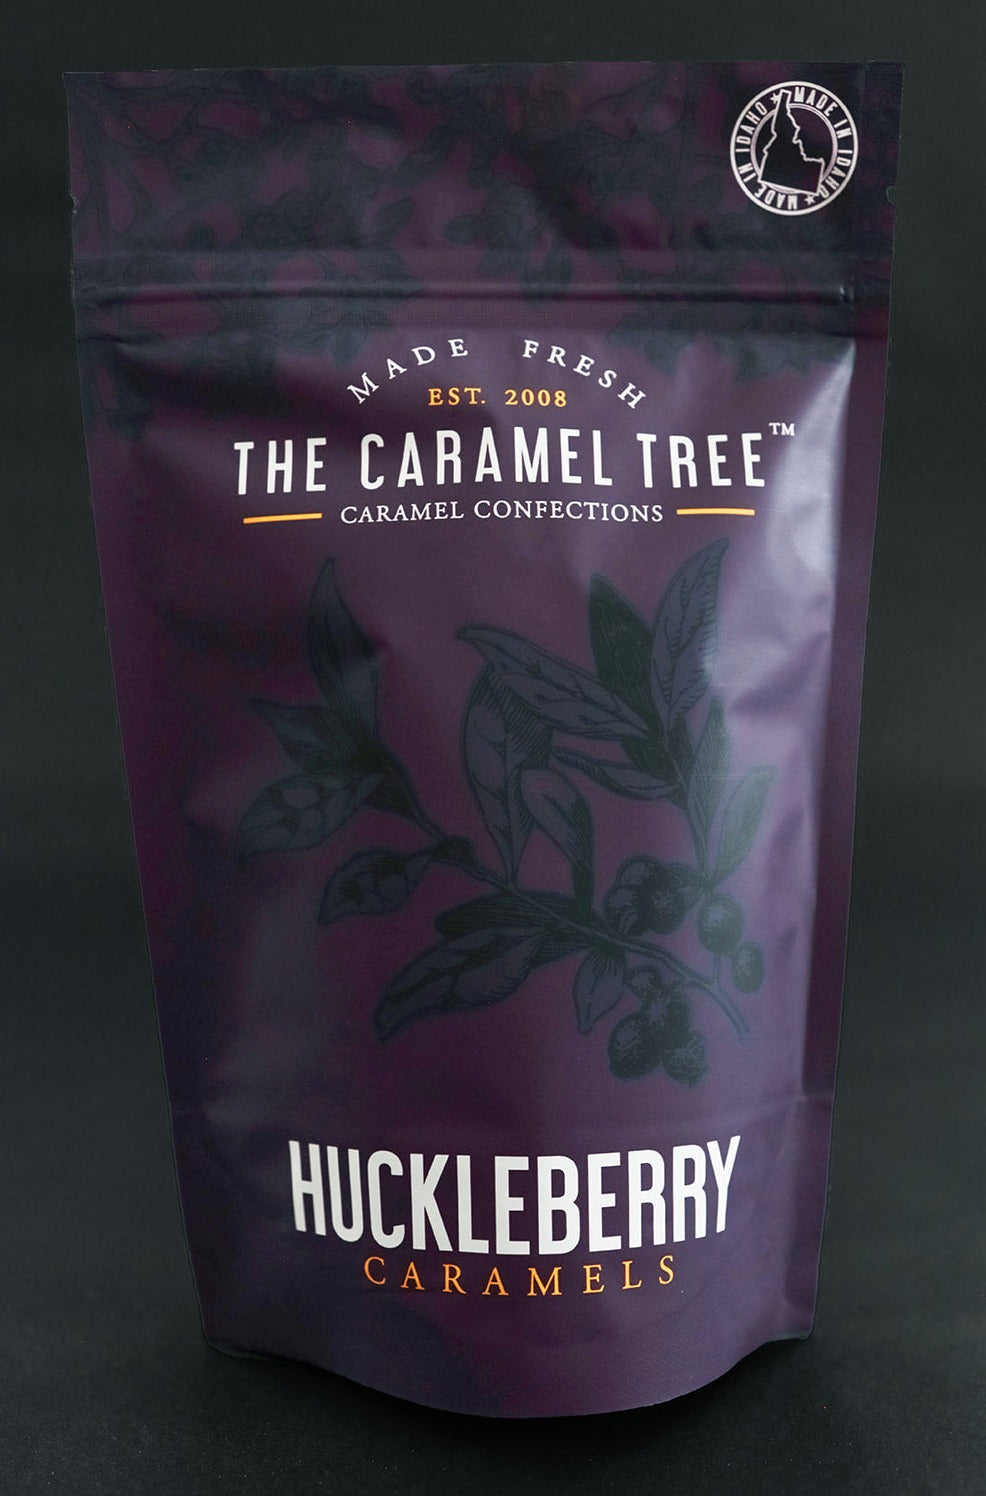 THE CARAMEL TREE HUCKLEBERRY CARAMELS POUCH